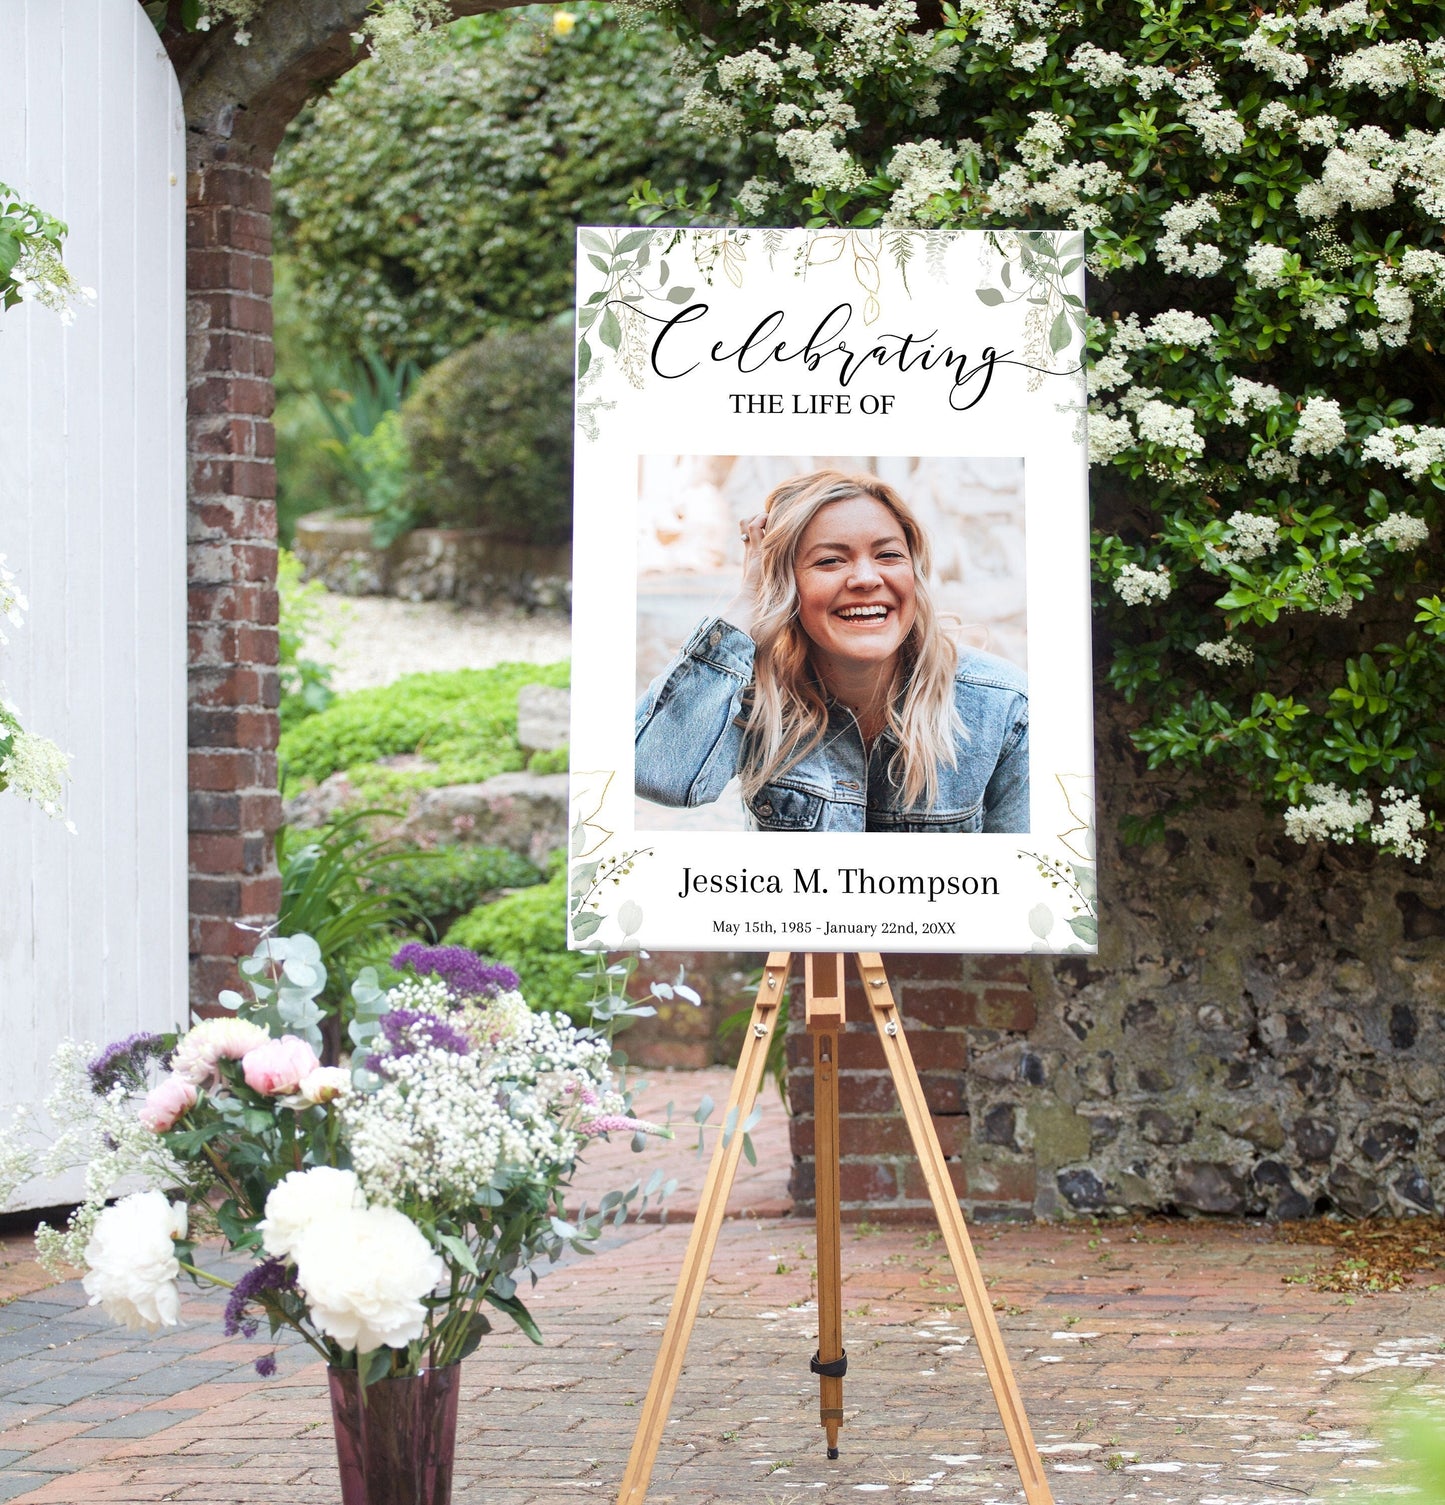 A funeral poster sits on an easel, it has a leafy green background with celebrating the life of written above the center photo. 